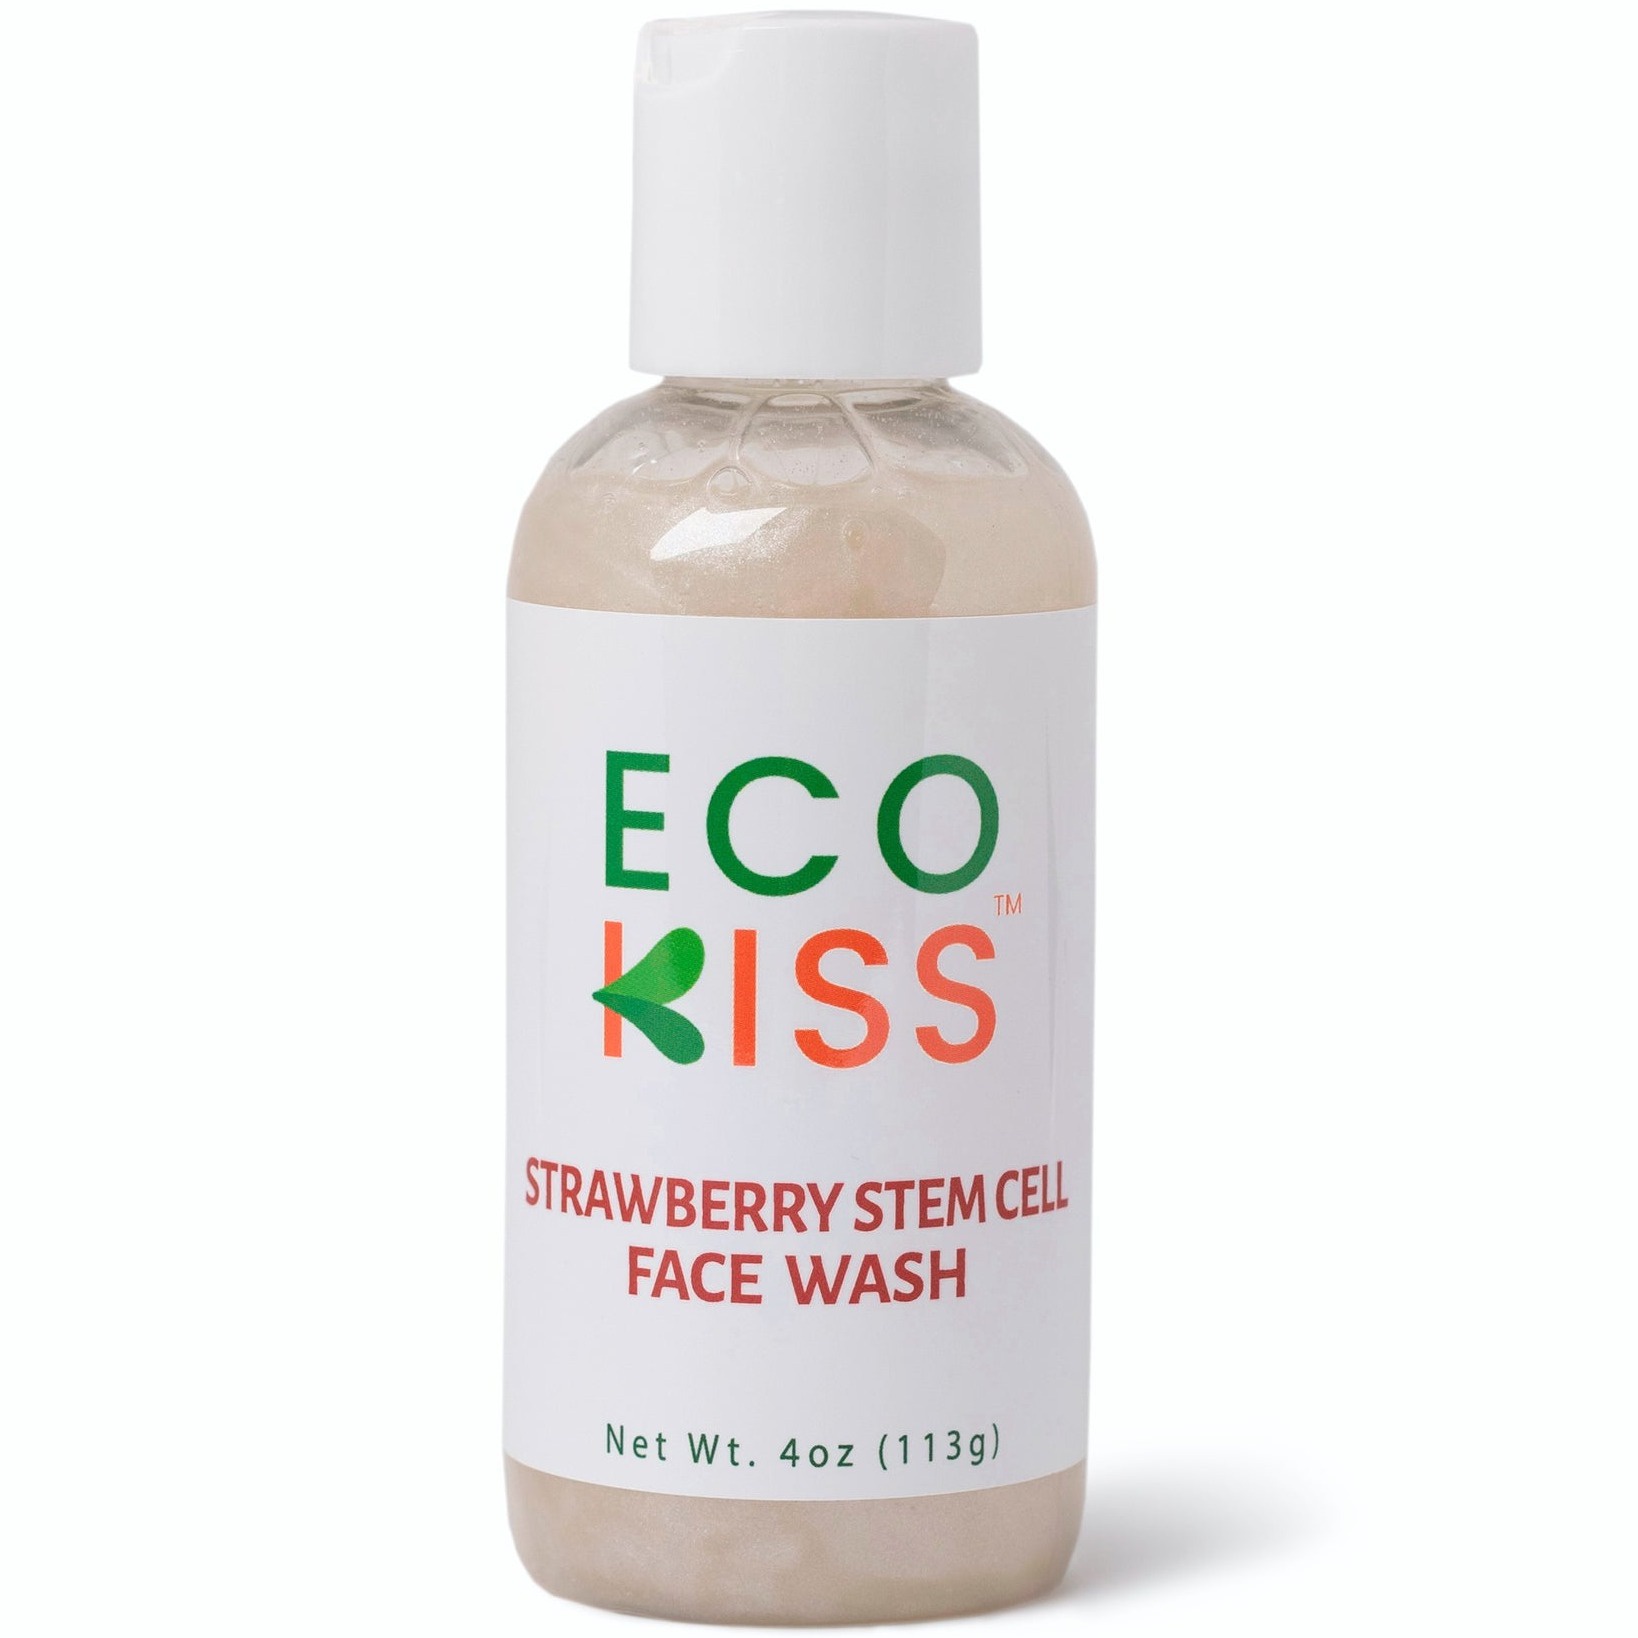 EcoKiss Strawberry Stem Cell Face Wash